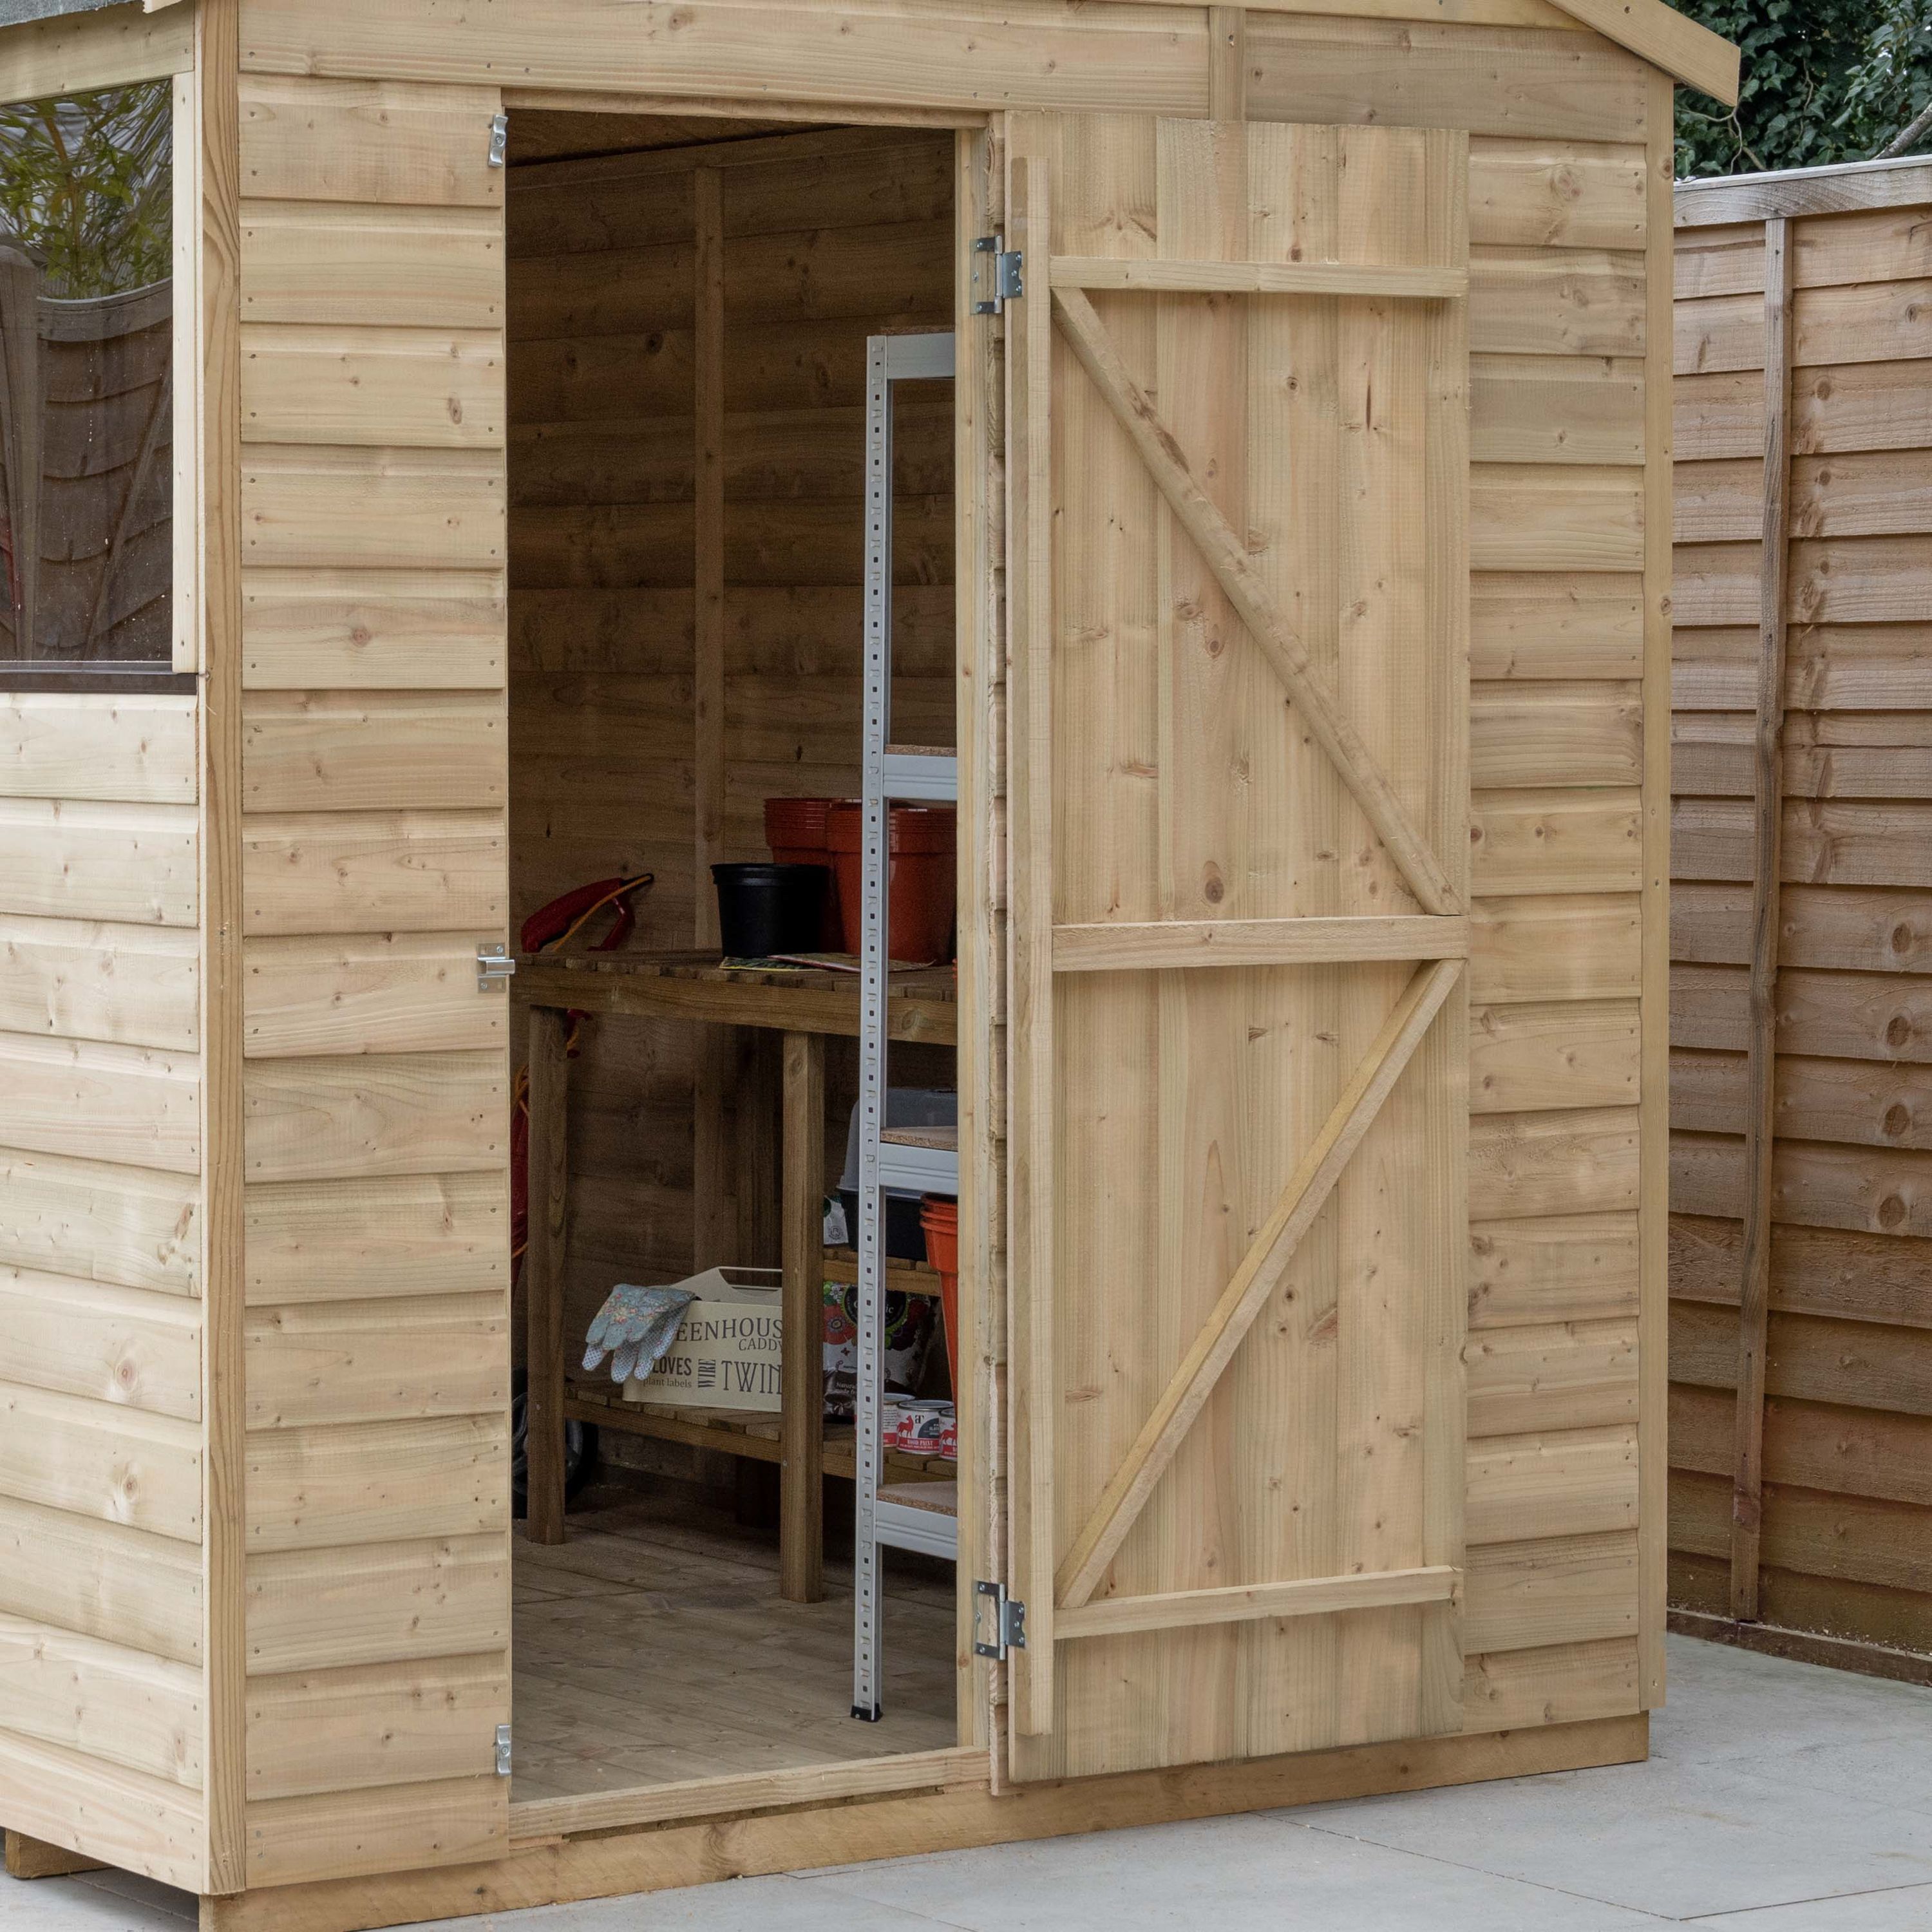 Forest Garden Beckwood 6x4 ft Reverse apex Natural timber Wooden Shed with floor & 1 window - Assembly not required